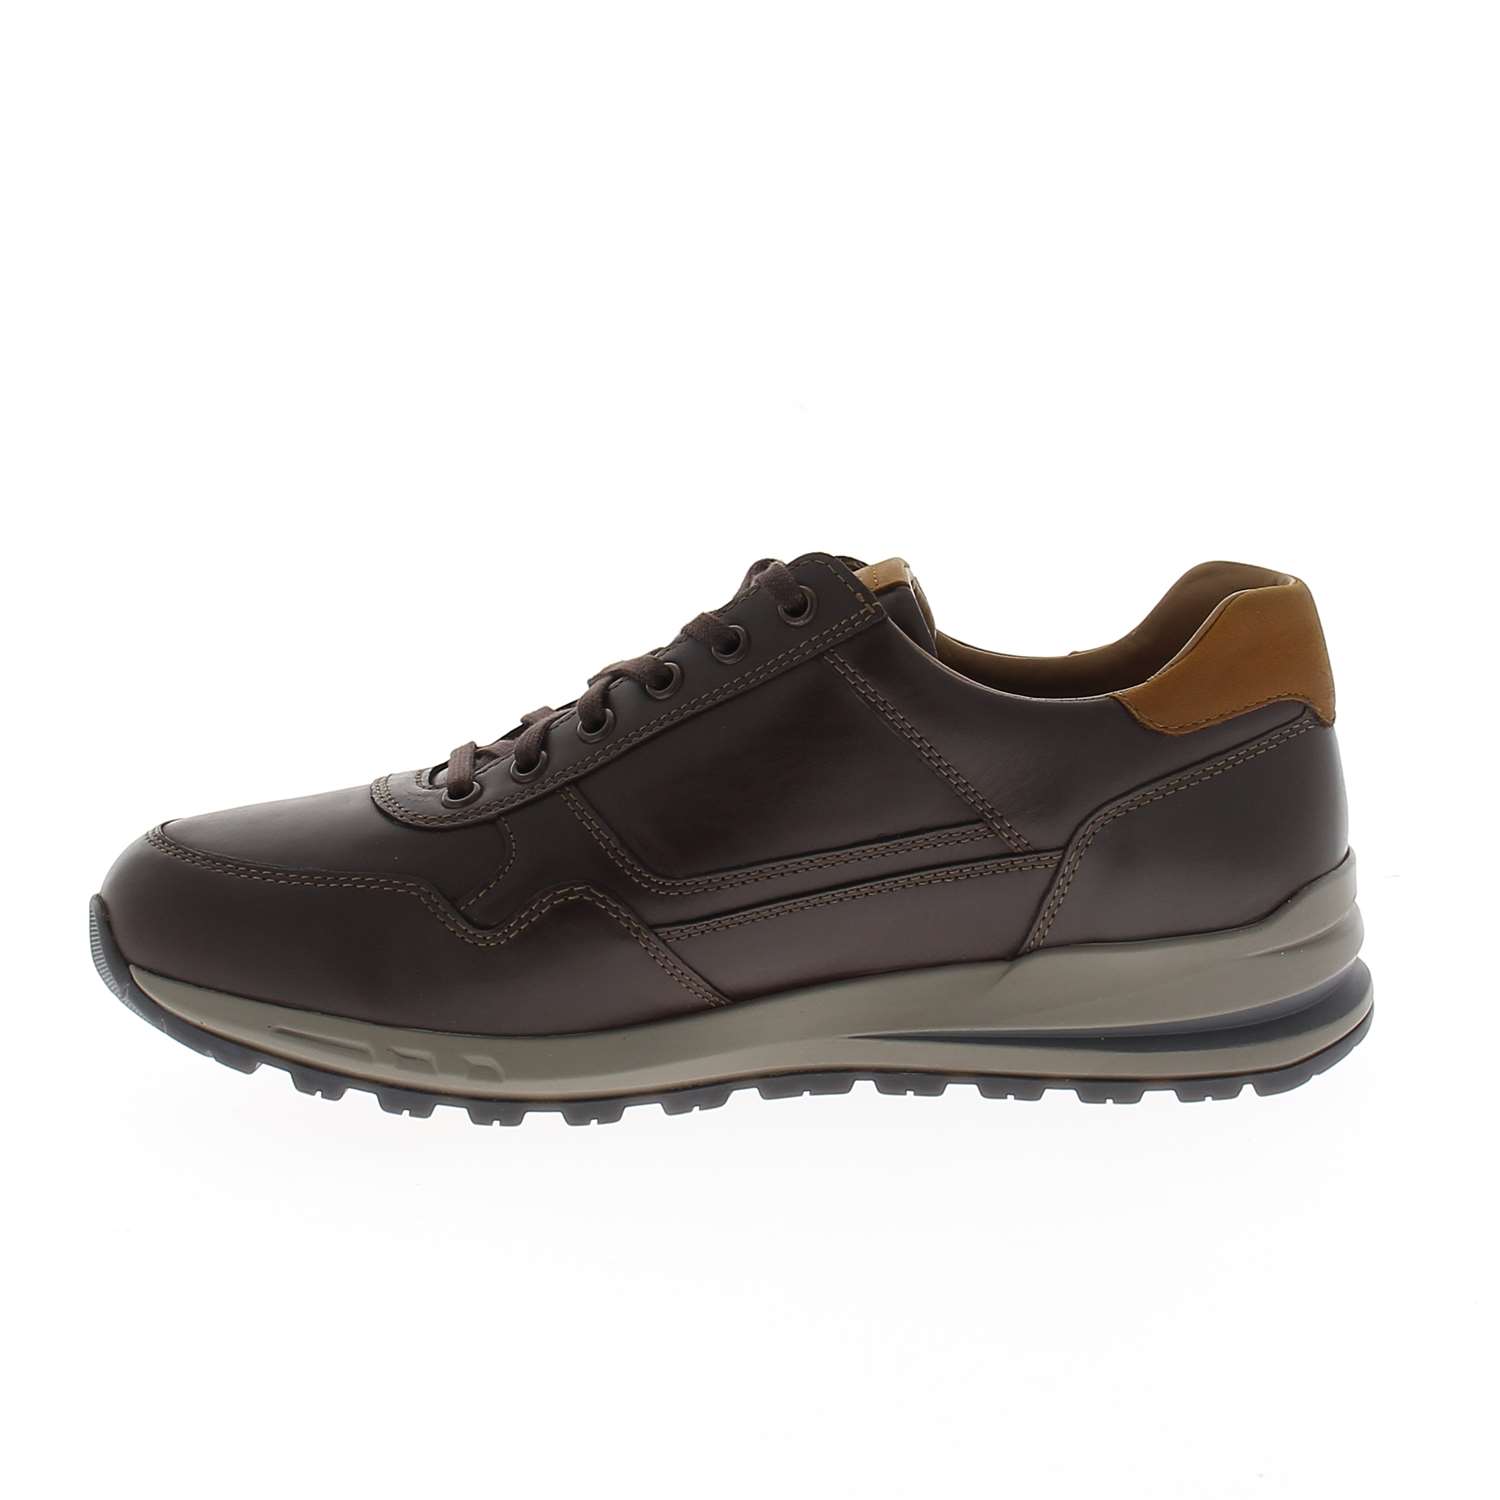 05 - BRADLEY - MEPHISTO - Chaussures à lacets - Cuir